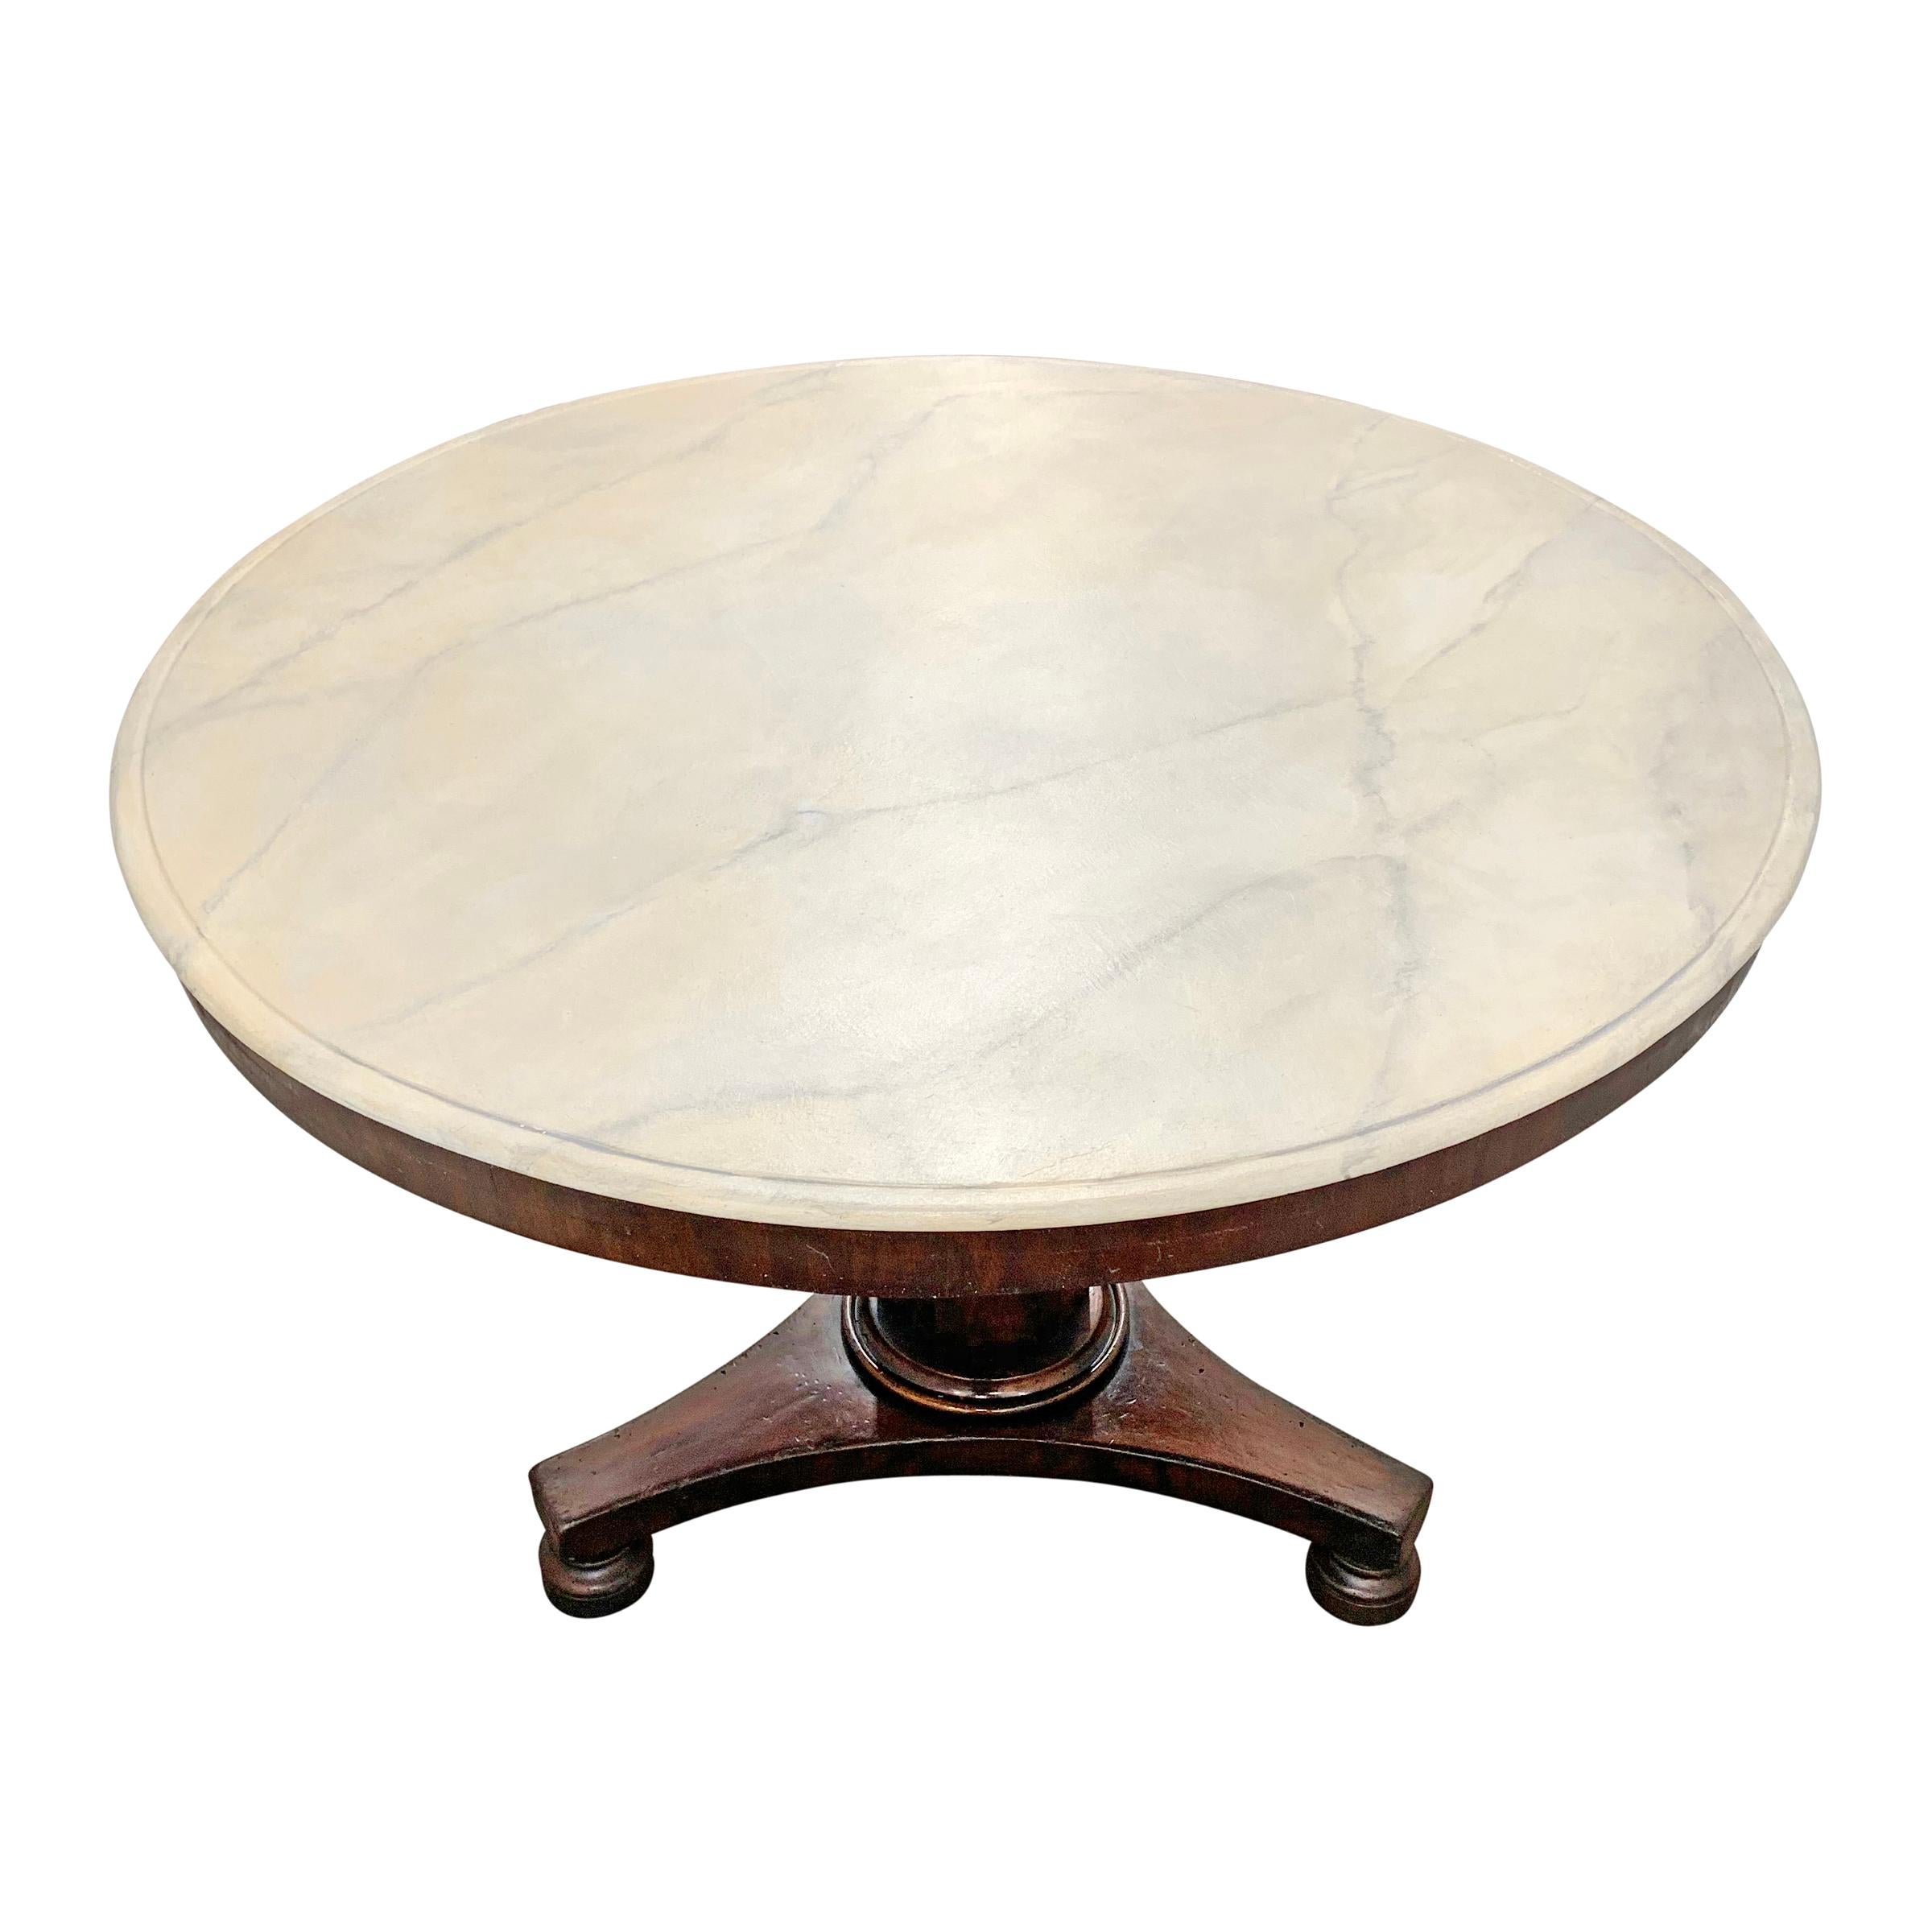 A sophisticated early 19th century English mahogany center table with a faux painted white marble top supported on a tapered hexagonal column resting on three legs with bun feet. Table is also a perfect size for use as a breakfast table.